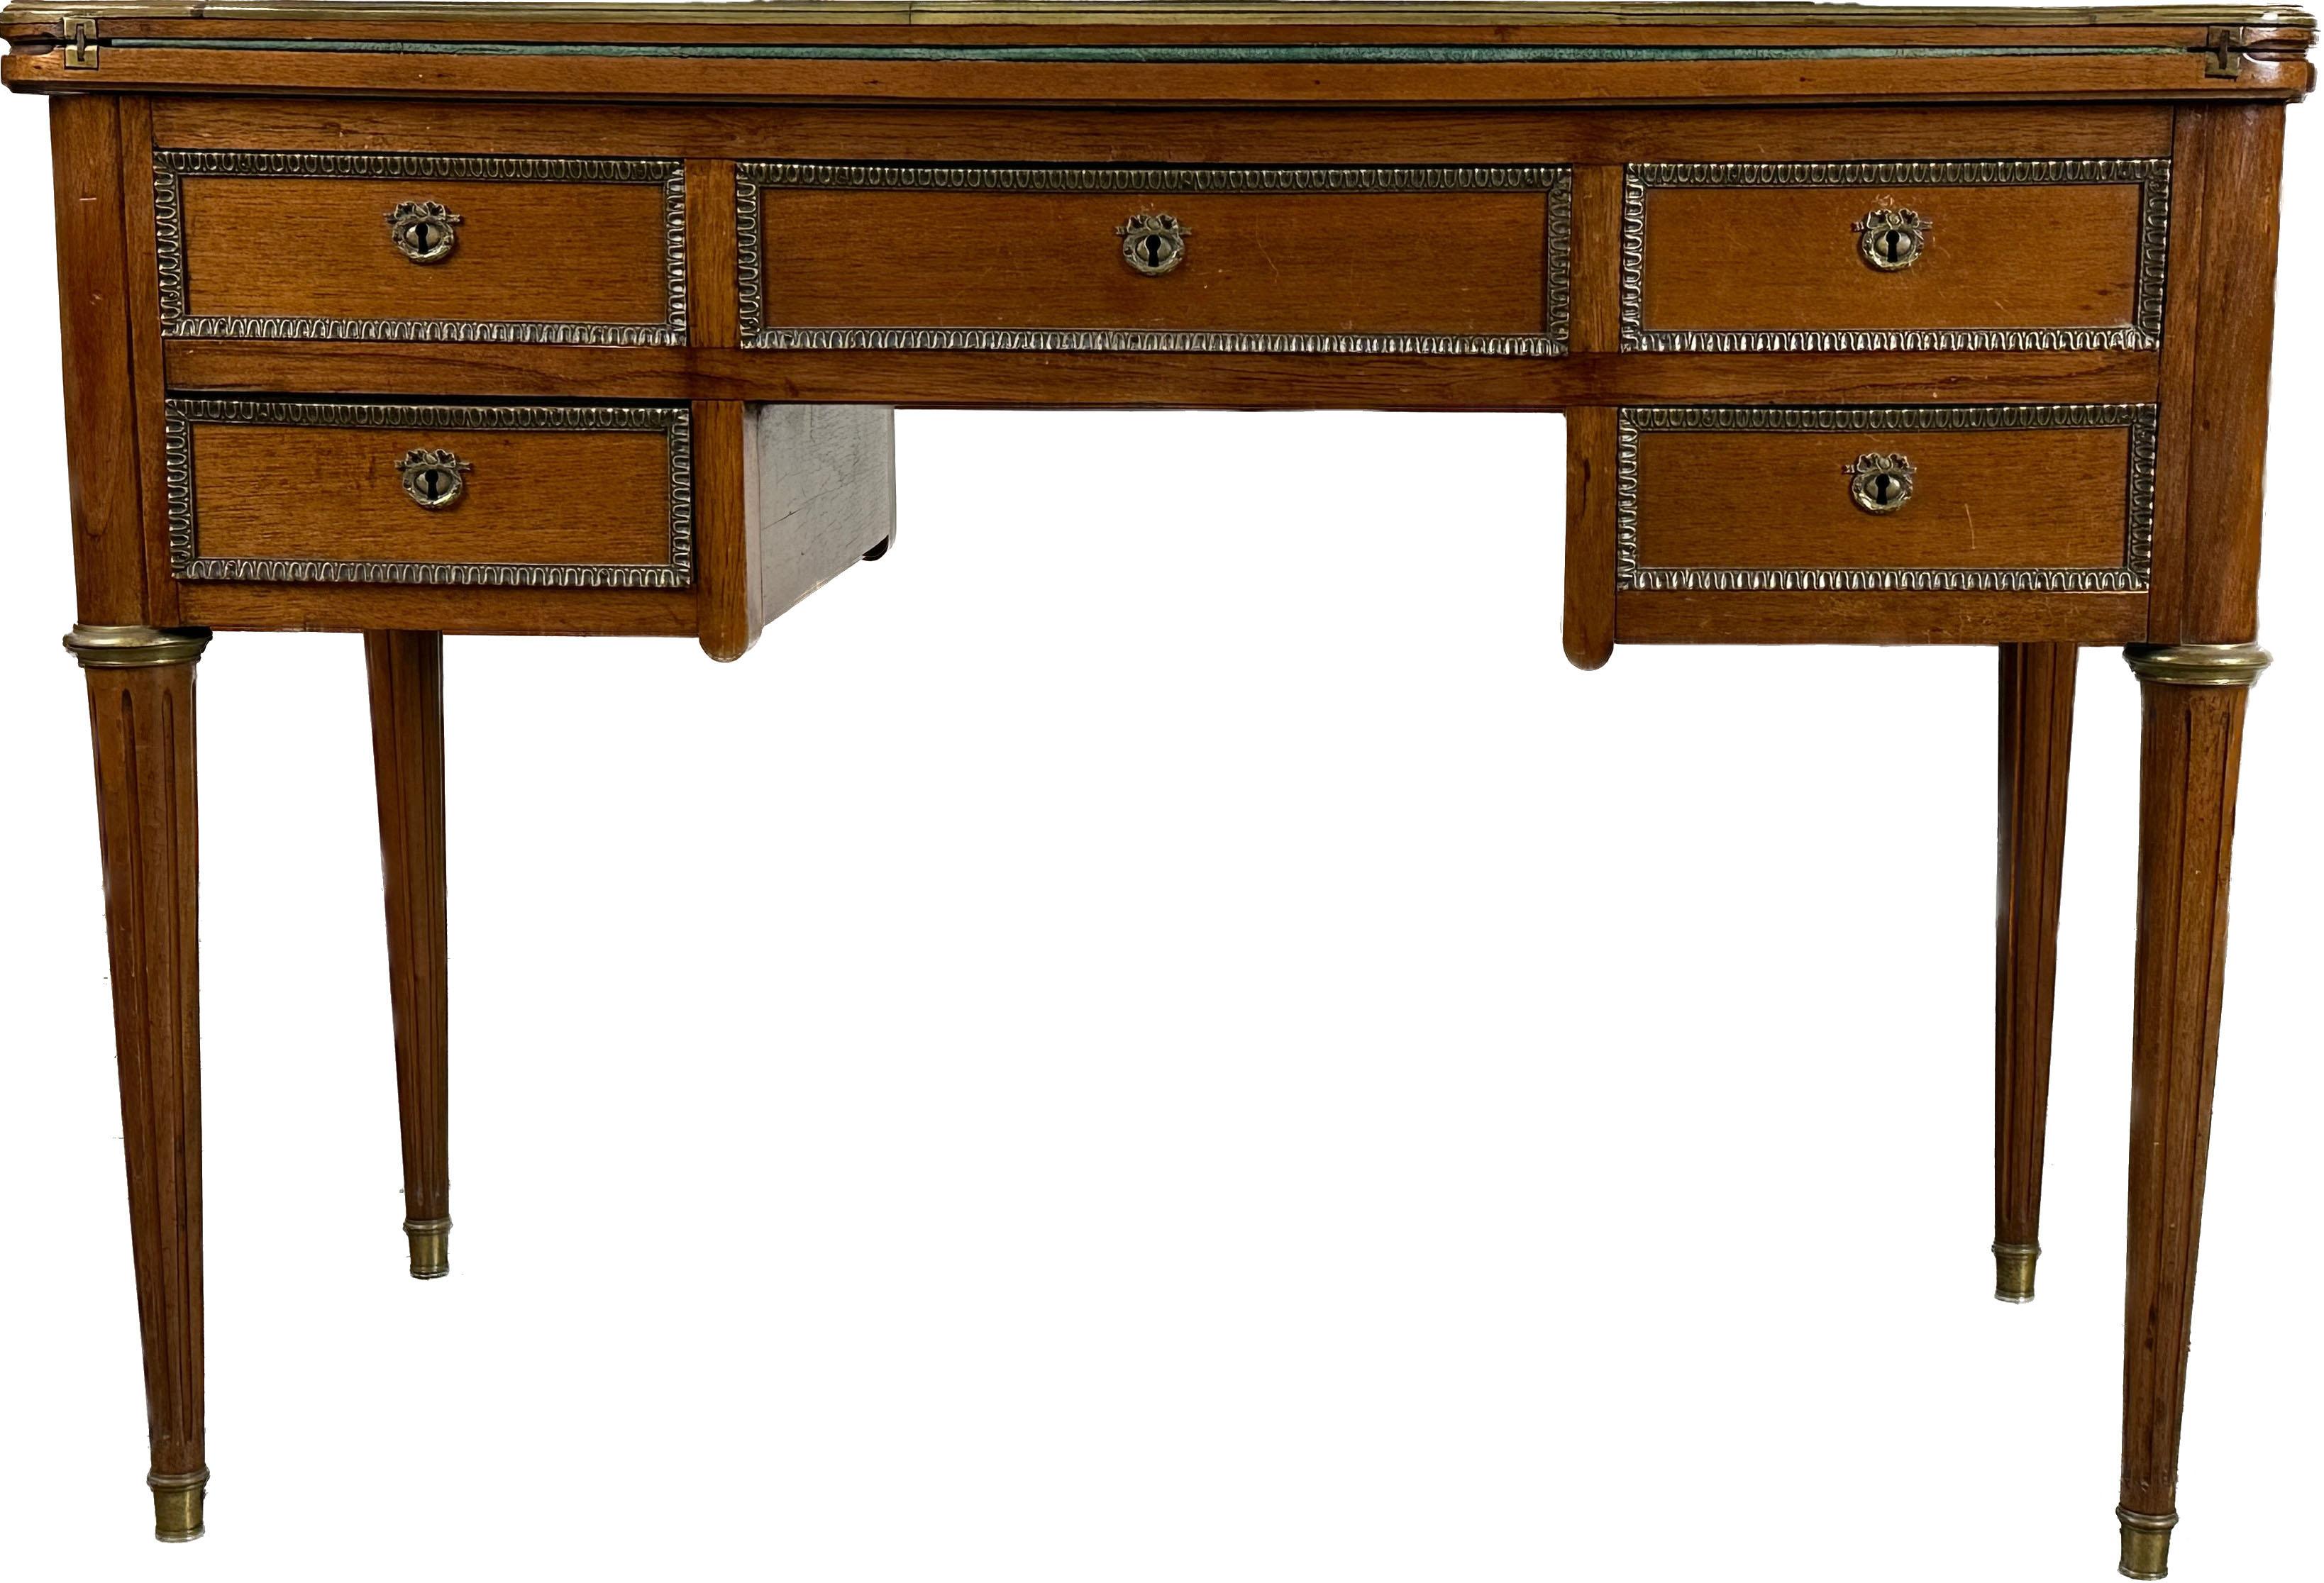 This folding game desk table replicates perfectly the Louis XVI-style elegance in both shape and quality. 
Boasting double-sided versatility, one face features four petite drawers next to a generously sized central compartment, while the back